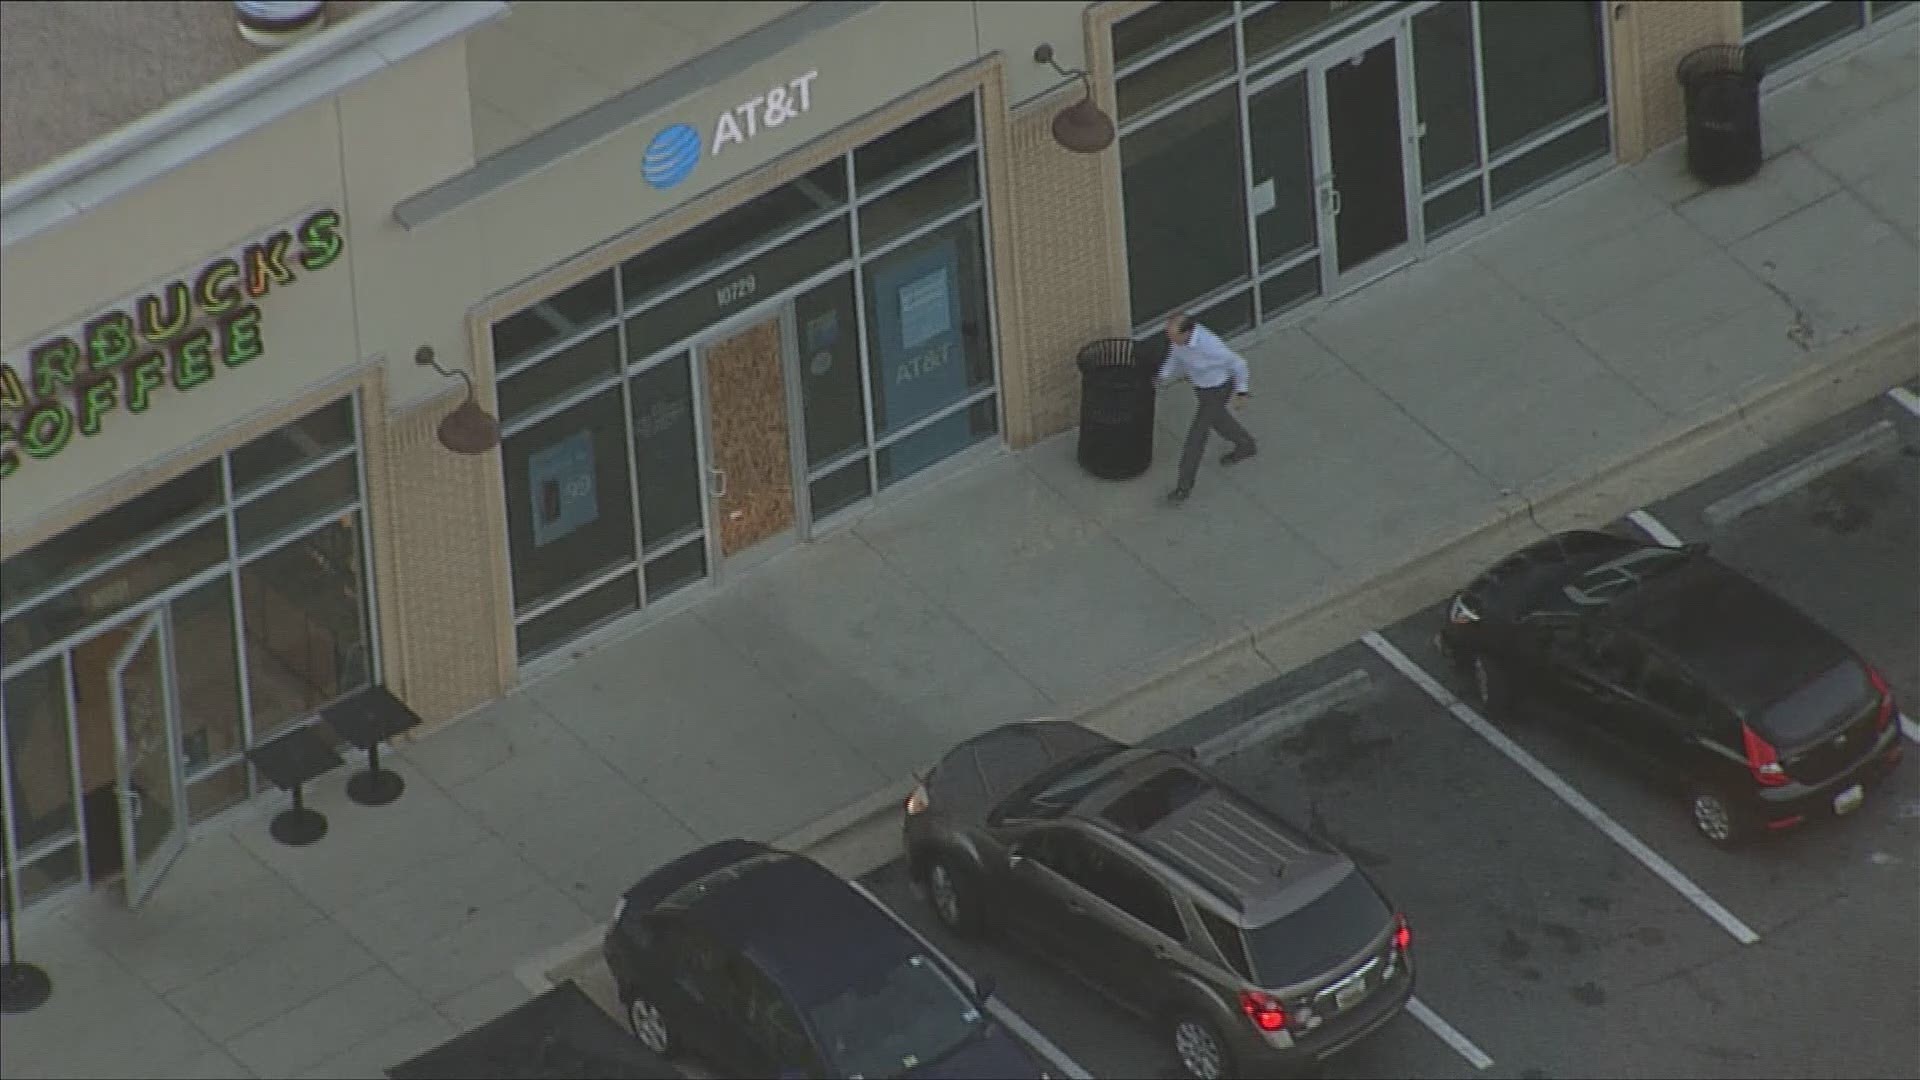 Montgomery County Police are investigating a smash and grab burglary incident that happened at an AT&T store in Silver Spring.